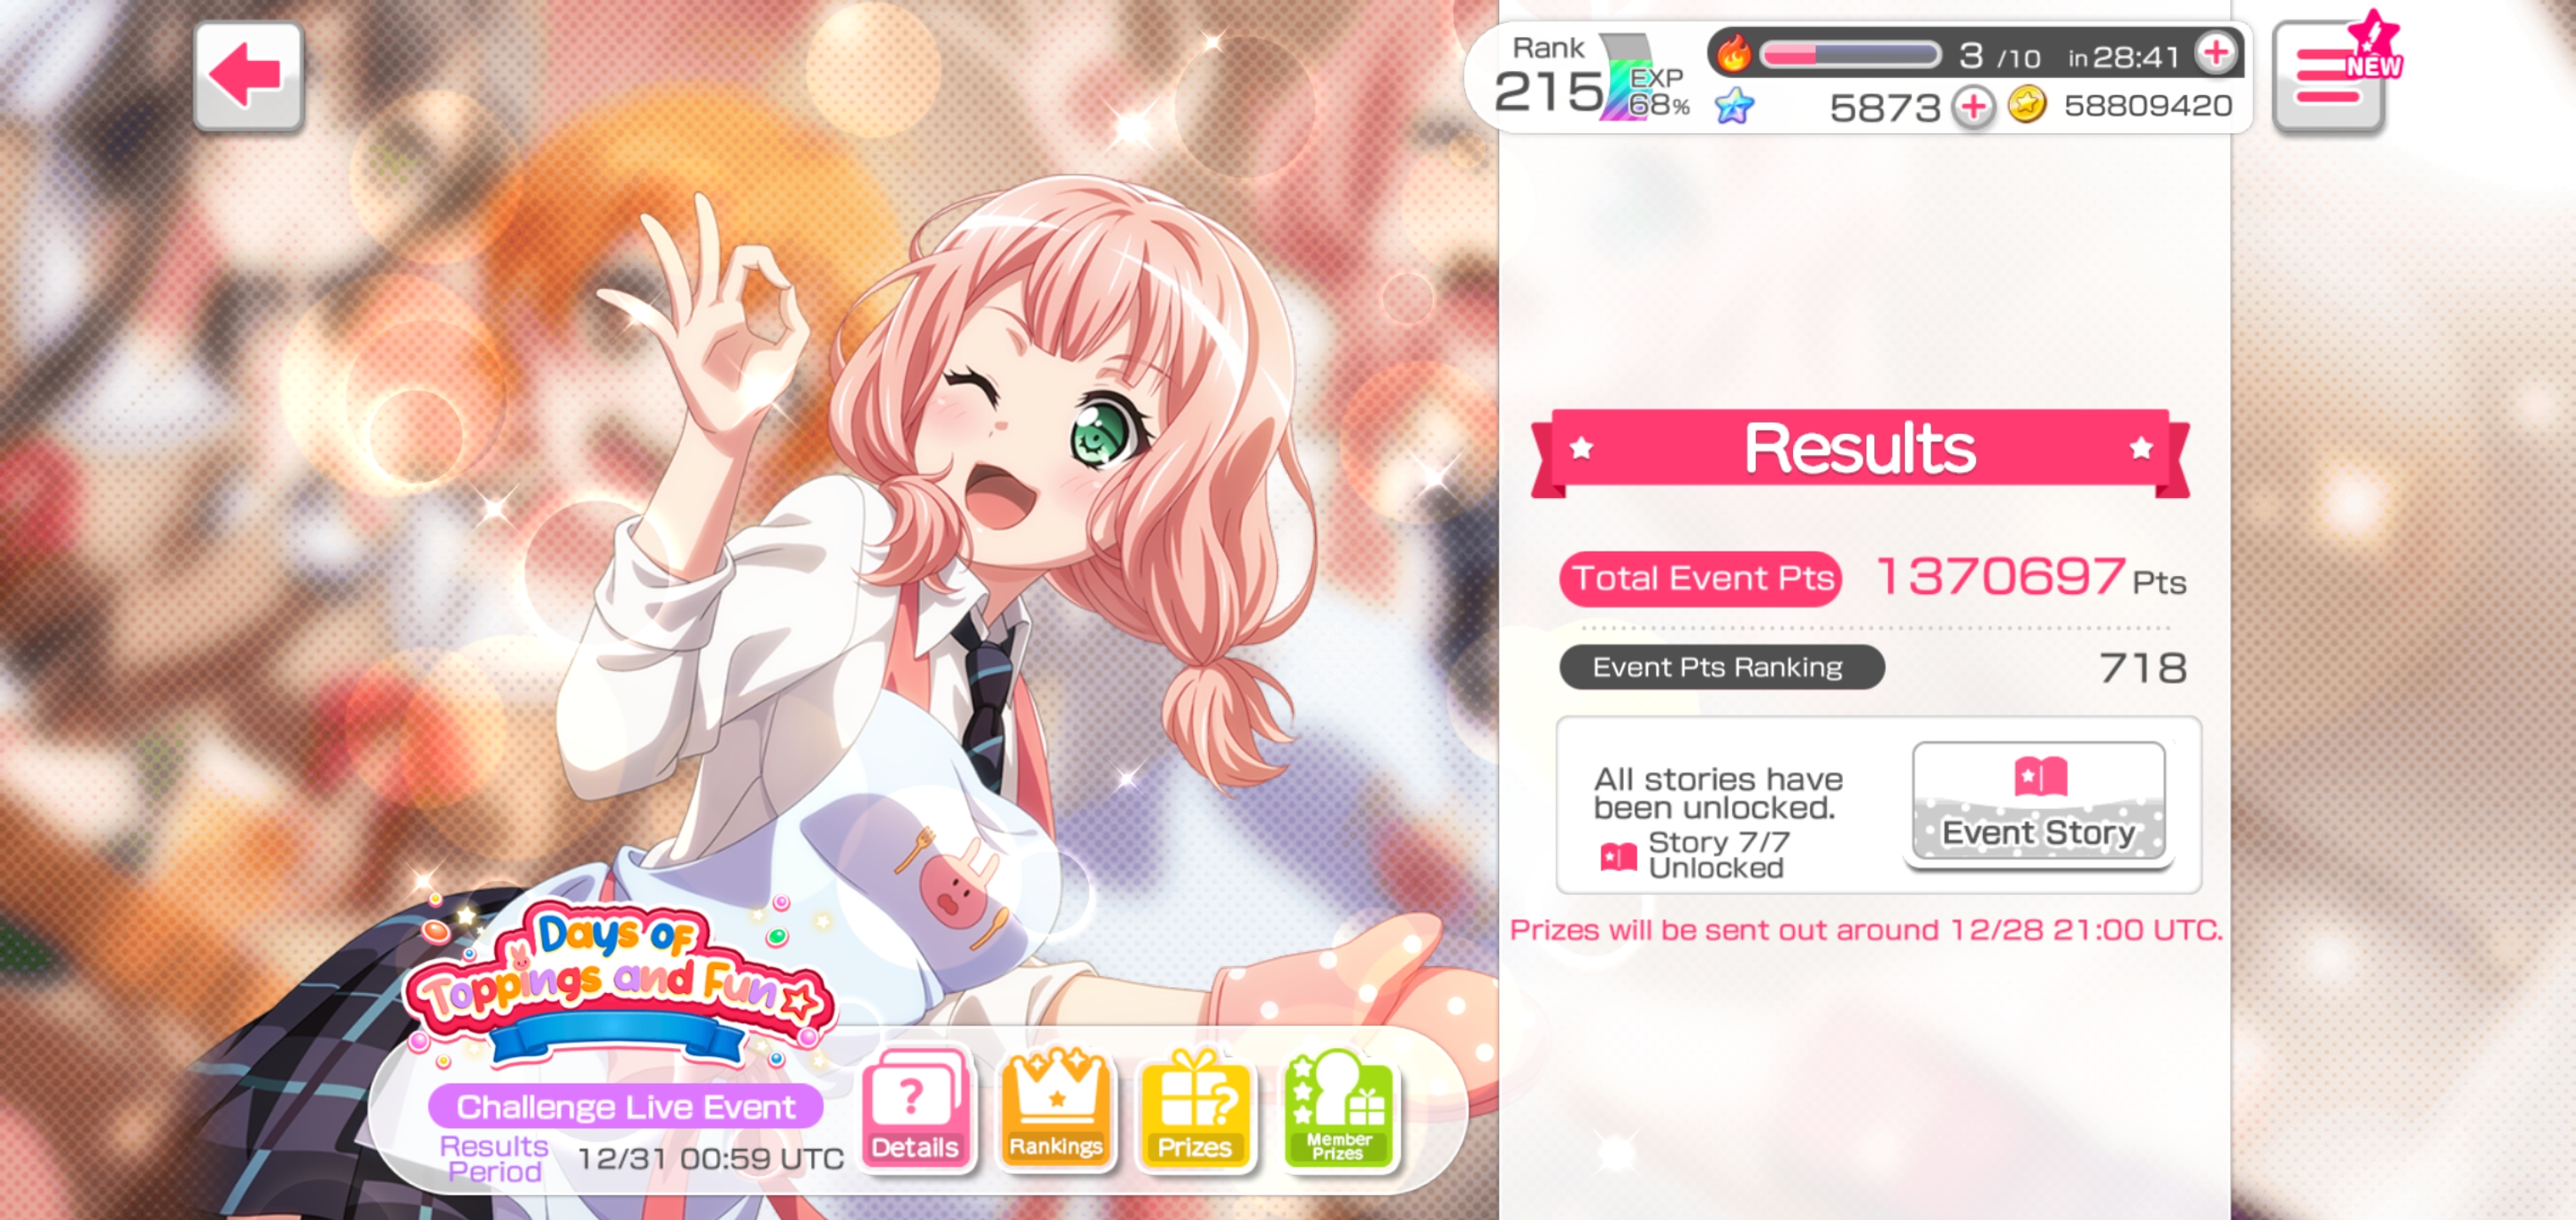 Bandori Confessions! — I love getting a high ranking during events, but